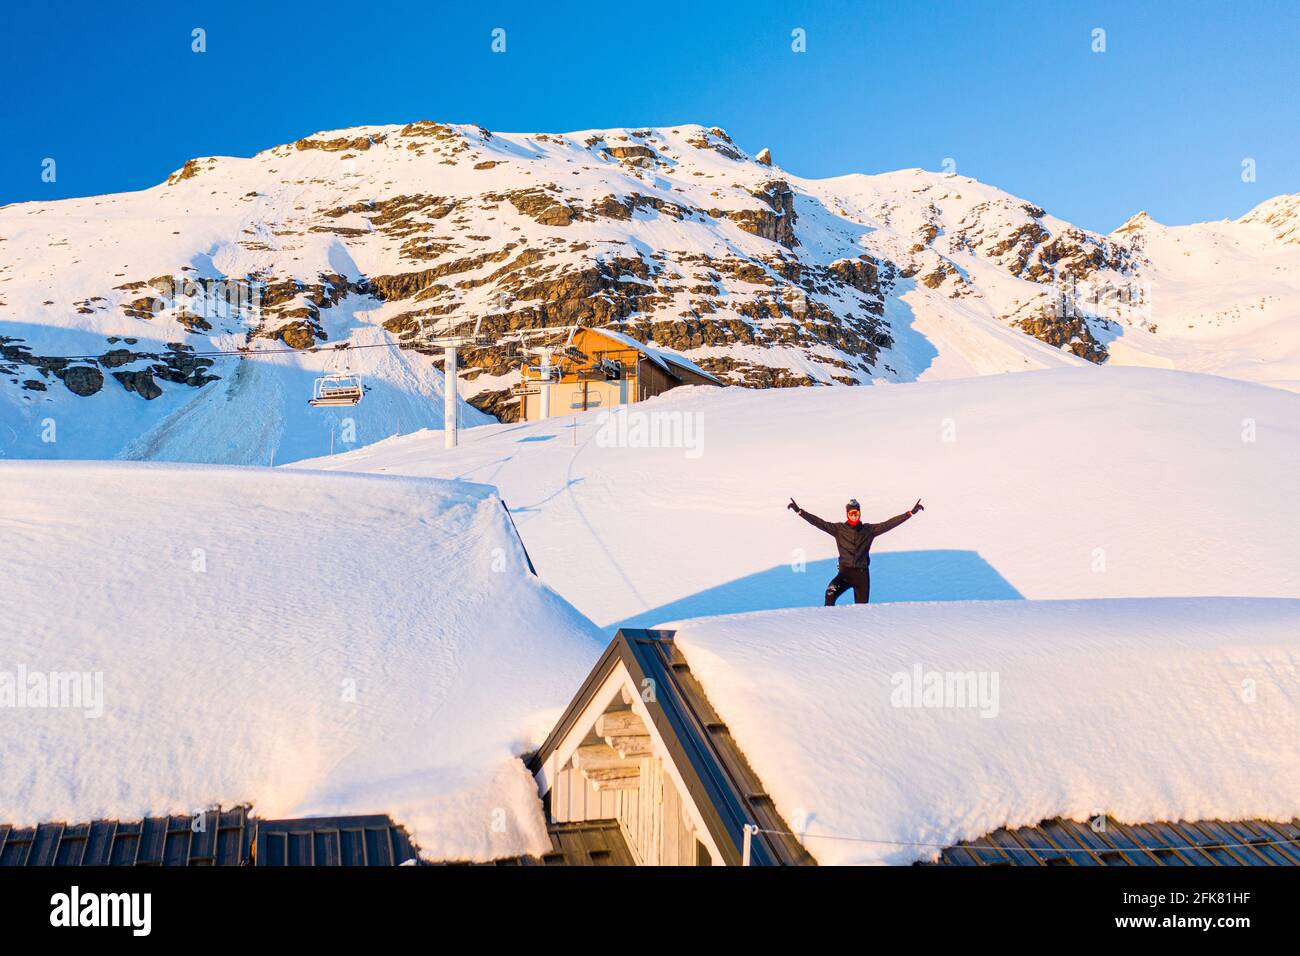 Man posing on the roof of a snow covered cottage like residence in Val Thorens, A  small ski town located at the base of french alps mountain range. Stock Photo